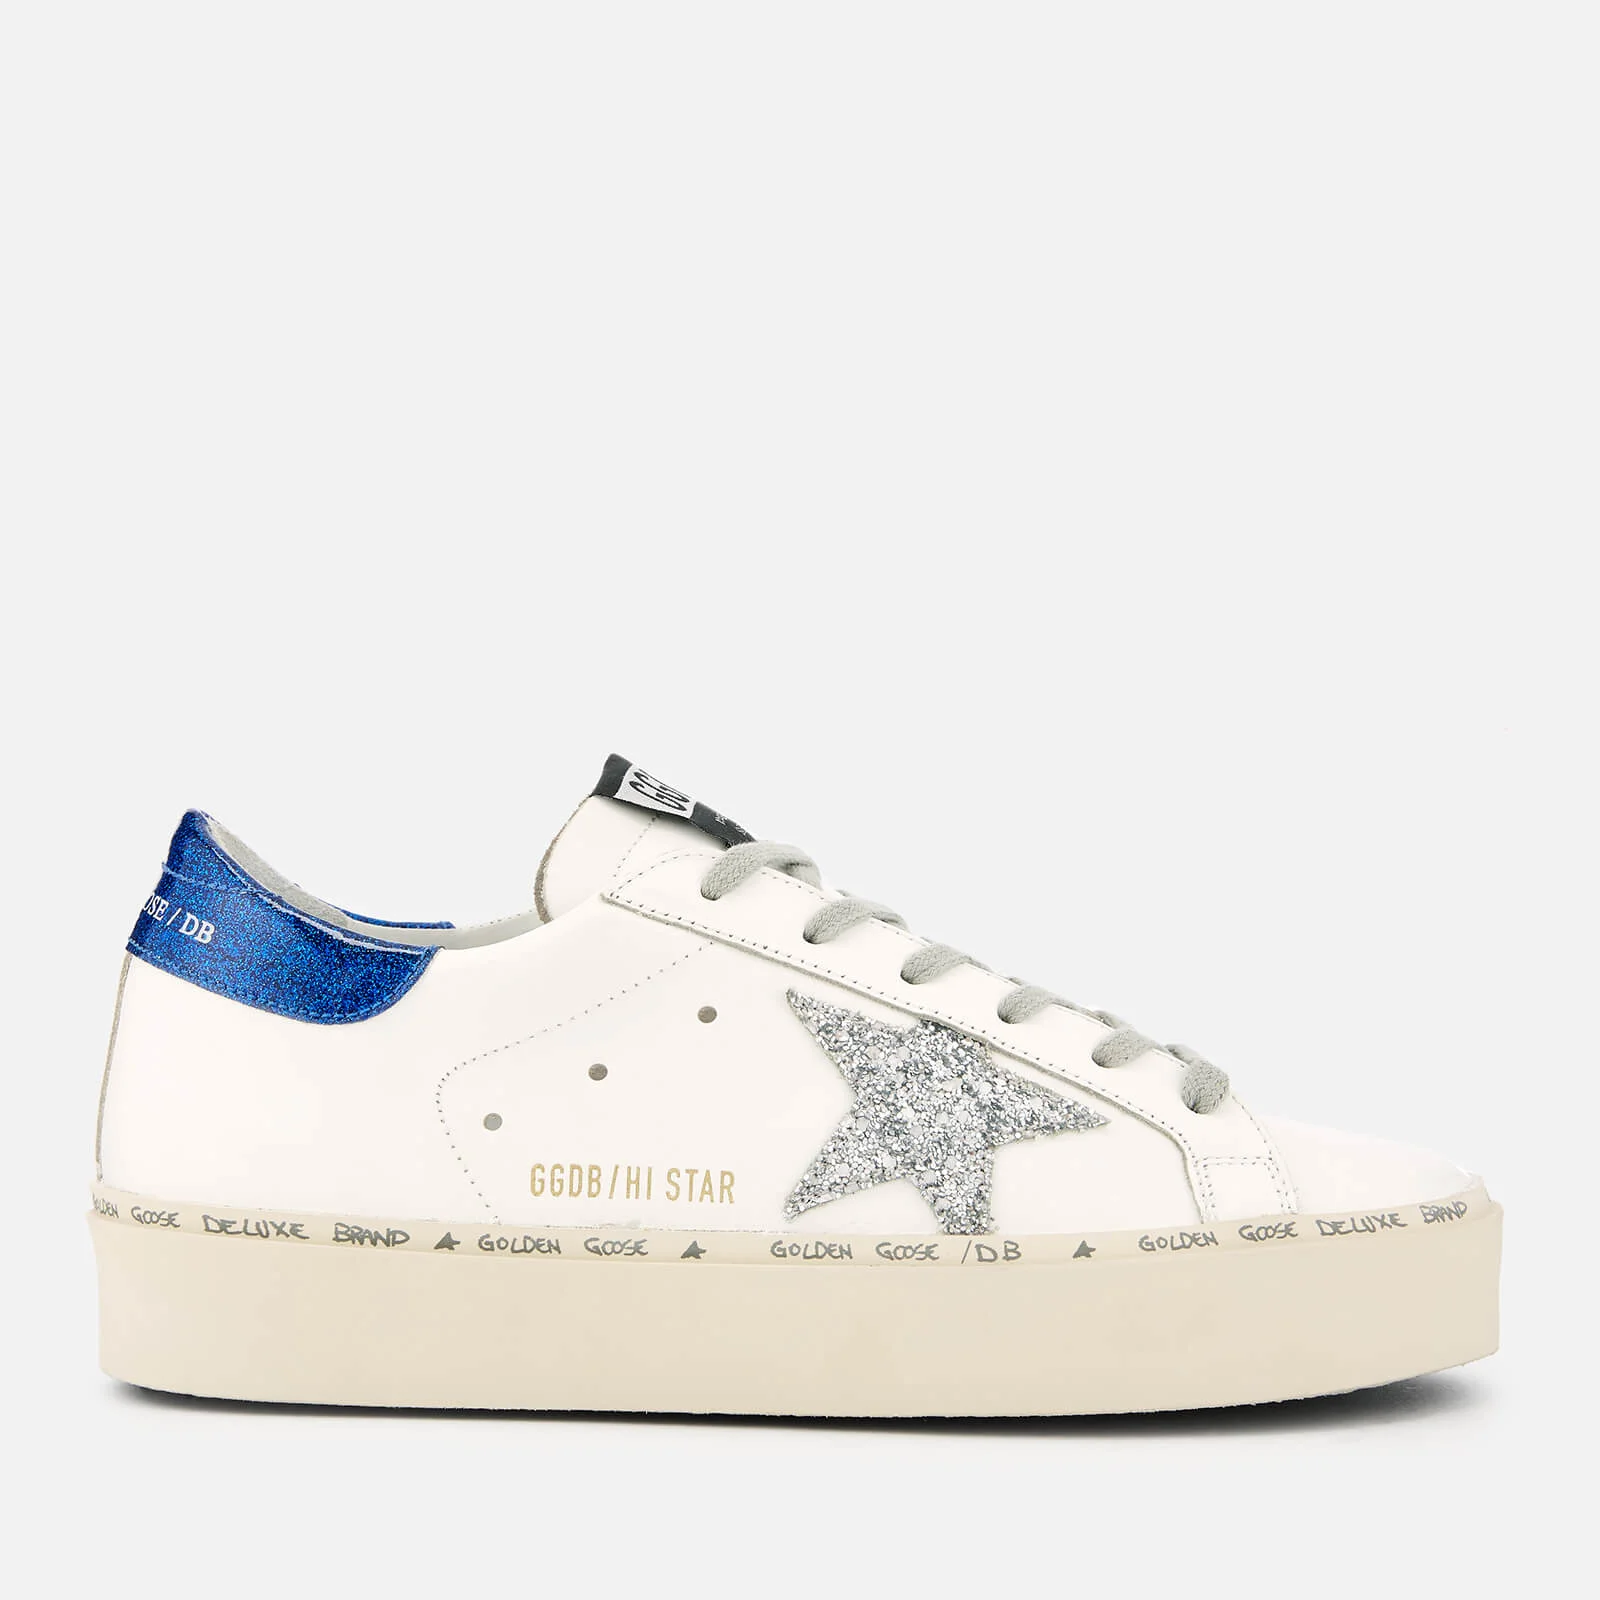 Golden Goose Women's Hi Star Leather Trainers - White/Blue/Silver Glitter Star Image 1